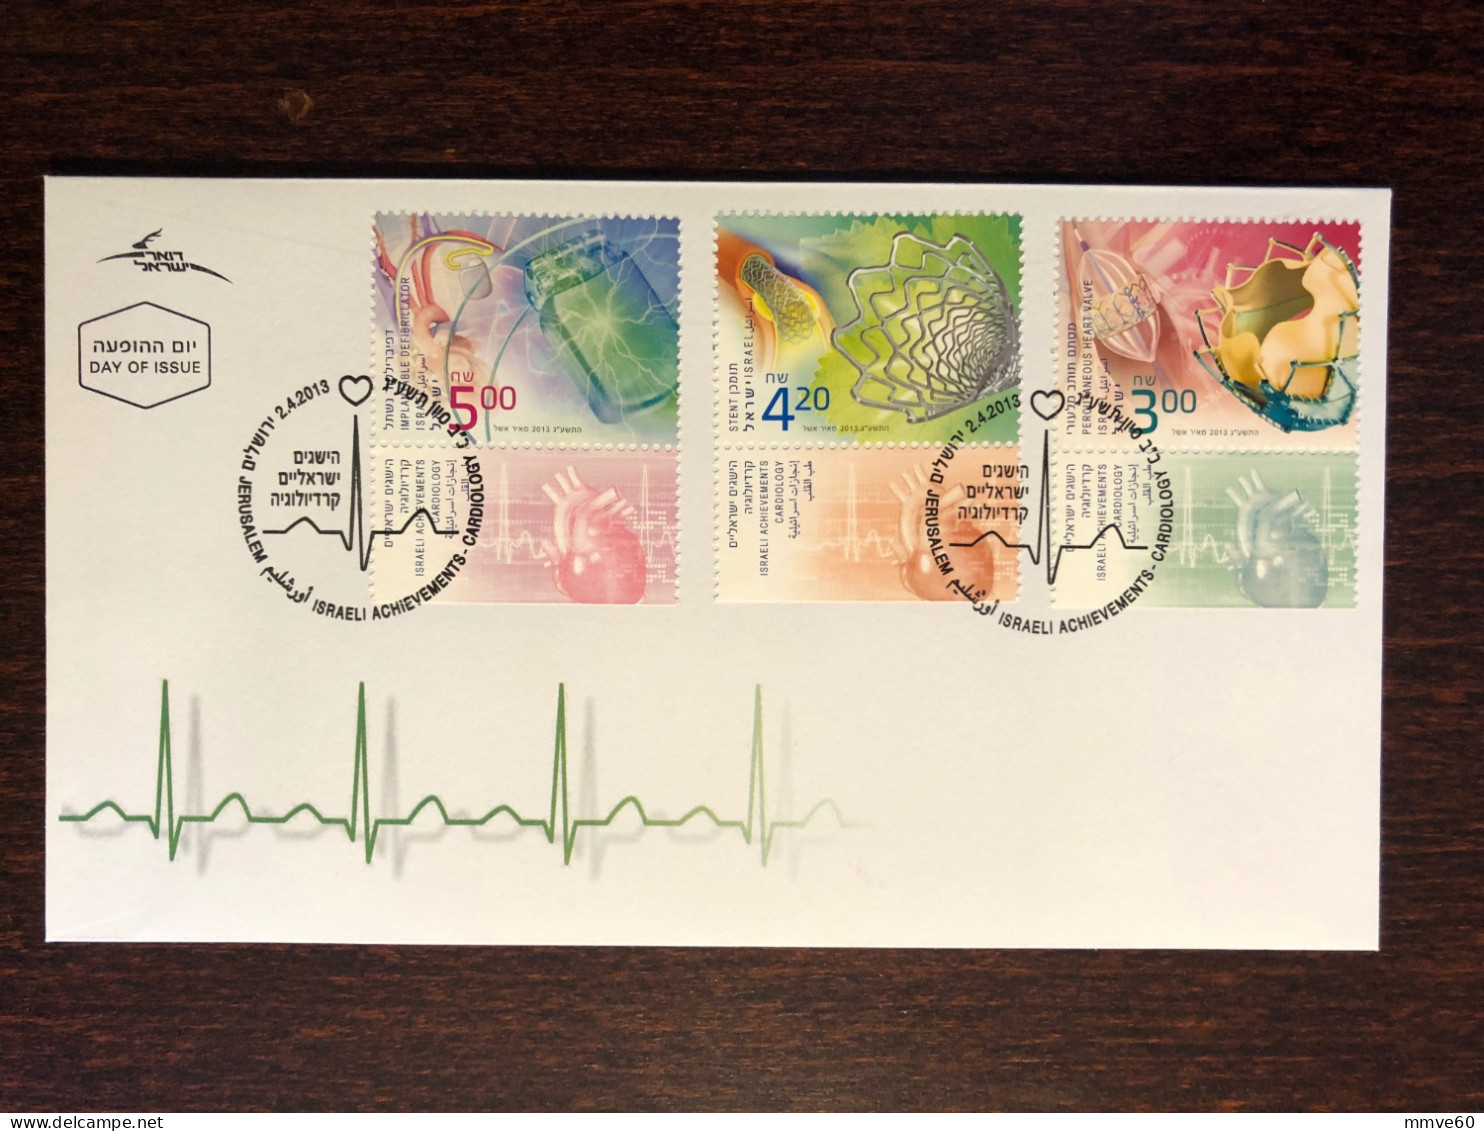 ISRAEL FDC COVER 2013 YEAR CARDIOLOGY HEART HEALTH MEDICINE STAMPS - FDC